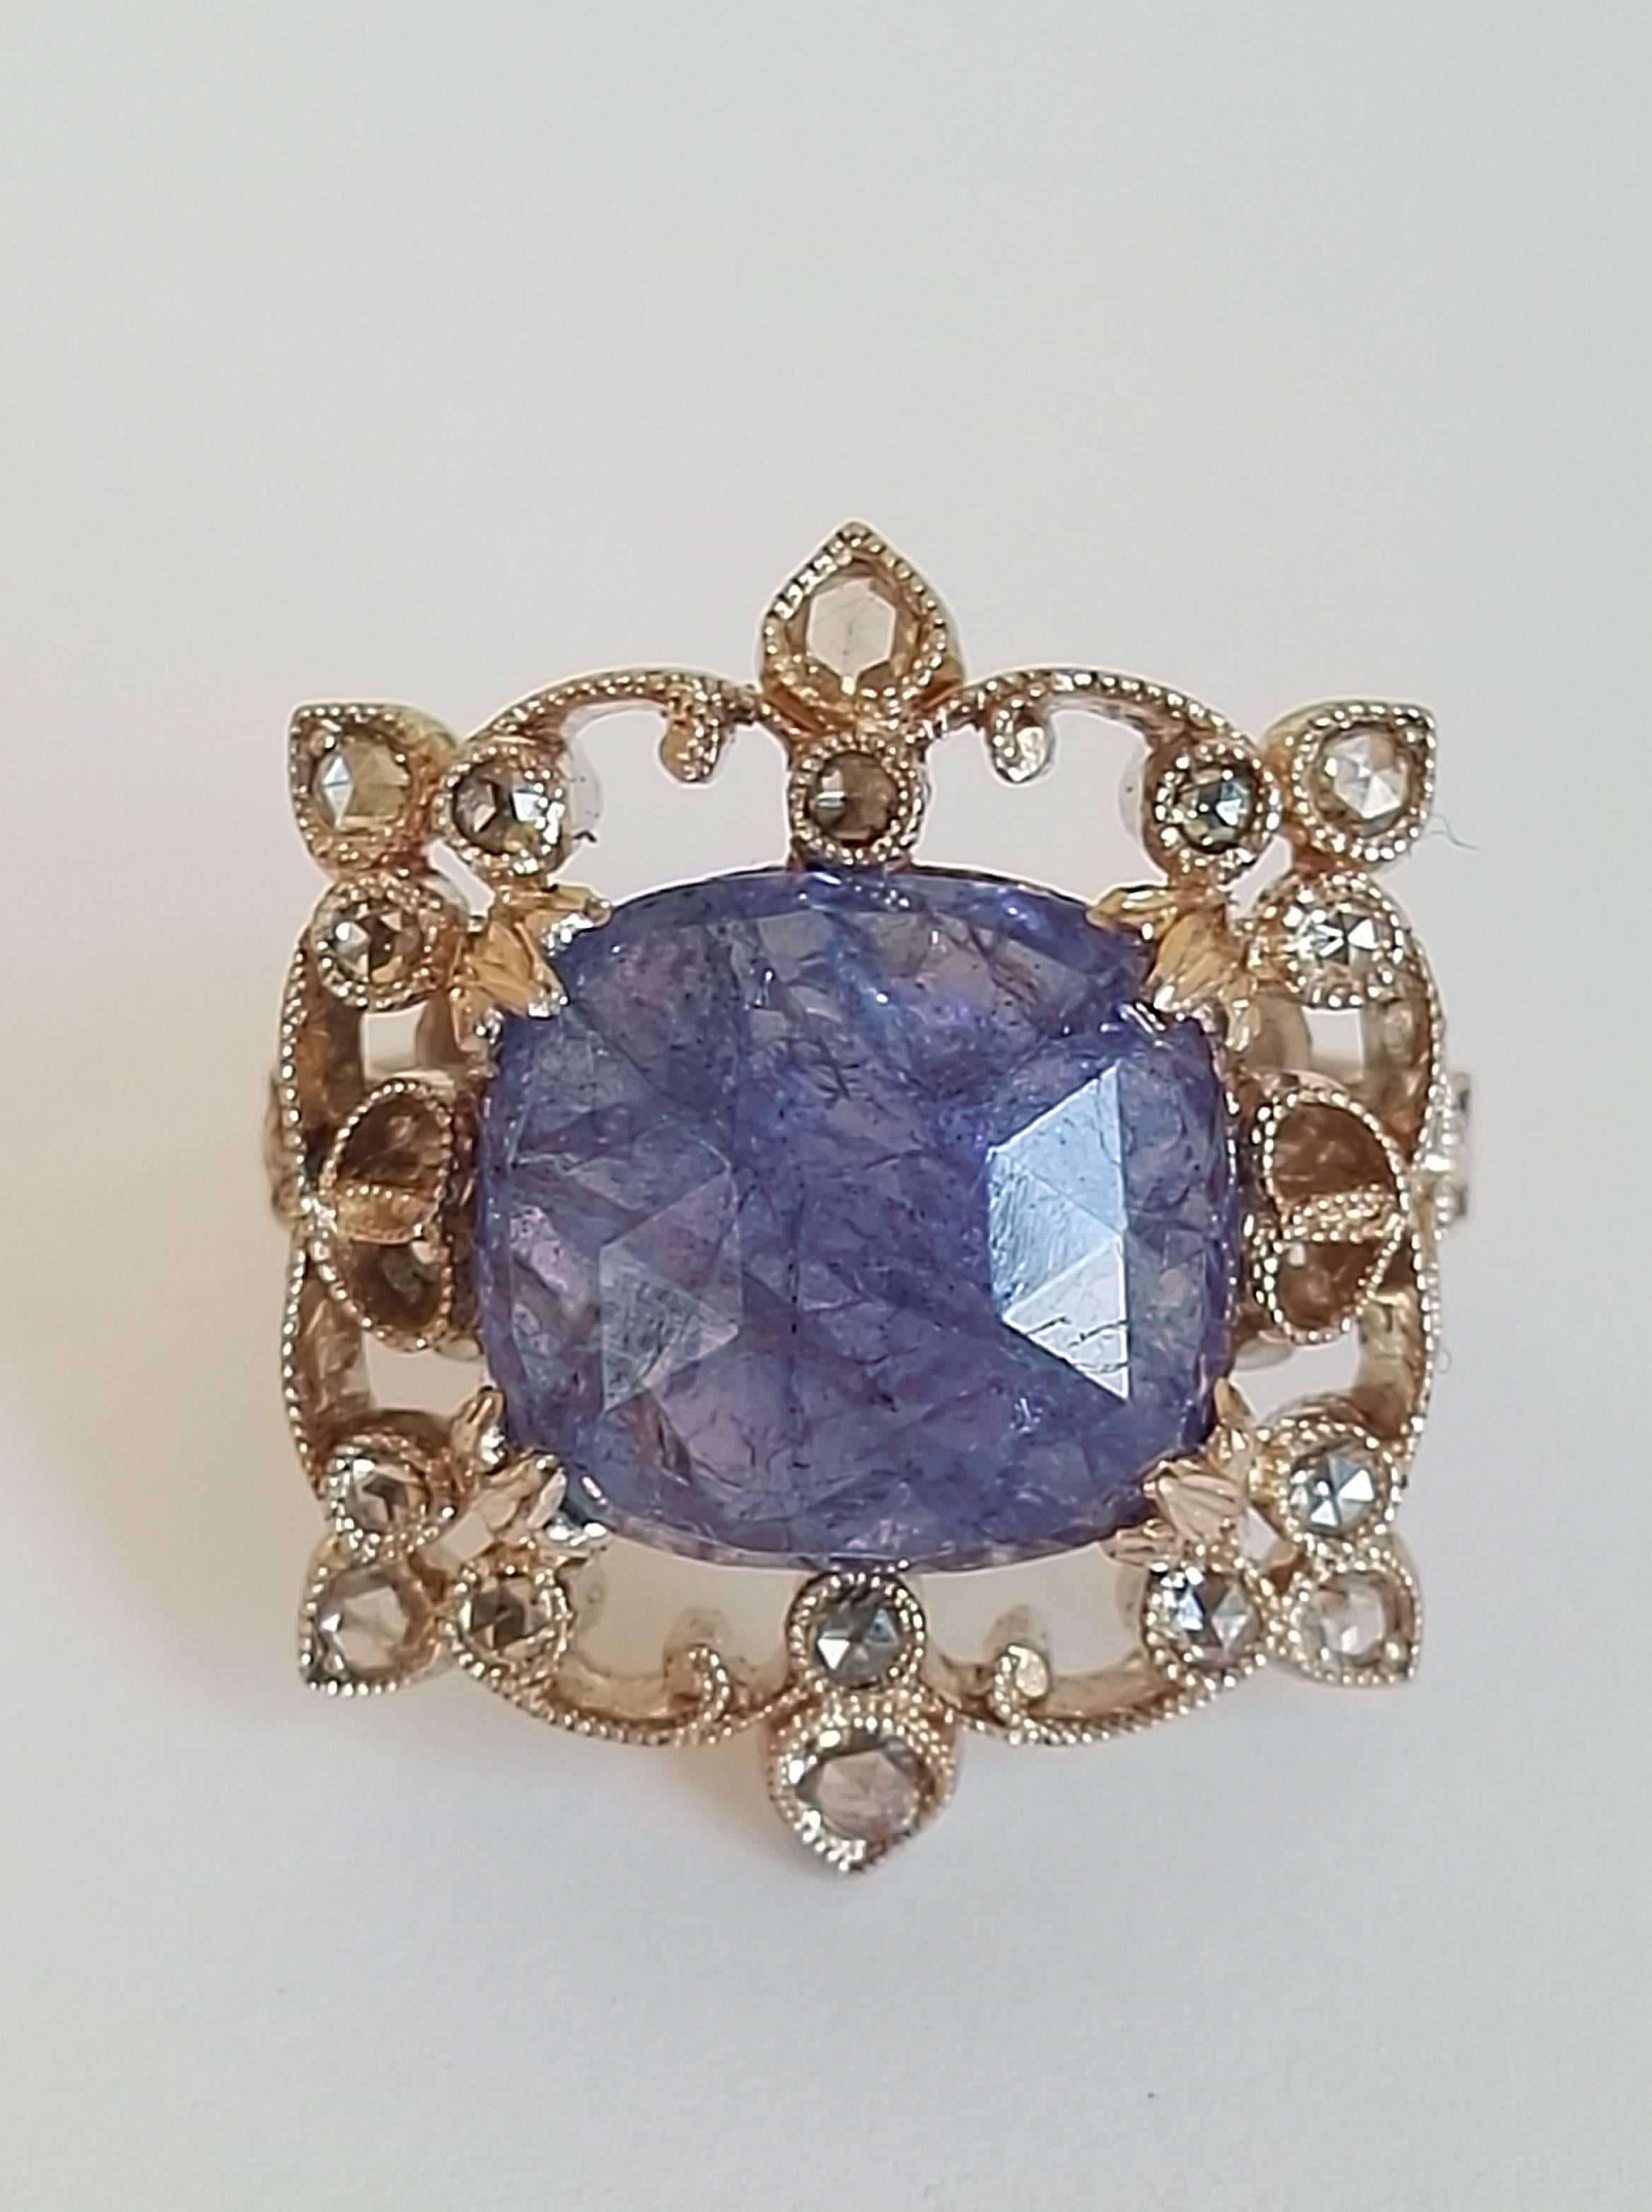 Dalben design Tanzanite and brown Diamond Ring mounted in 18 kt white gold. One Oval cut Tanzanite weighting 6,32 carat and 22 rose cut brown Diamonds weighting 0,45 carats. Ring size 7 1/4 USA - 55 EU resizable to most finger sizes. 
The Ring has